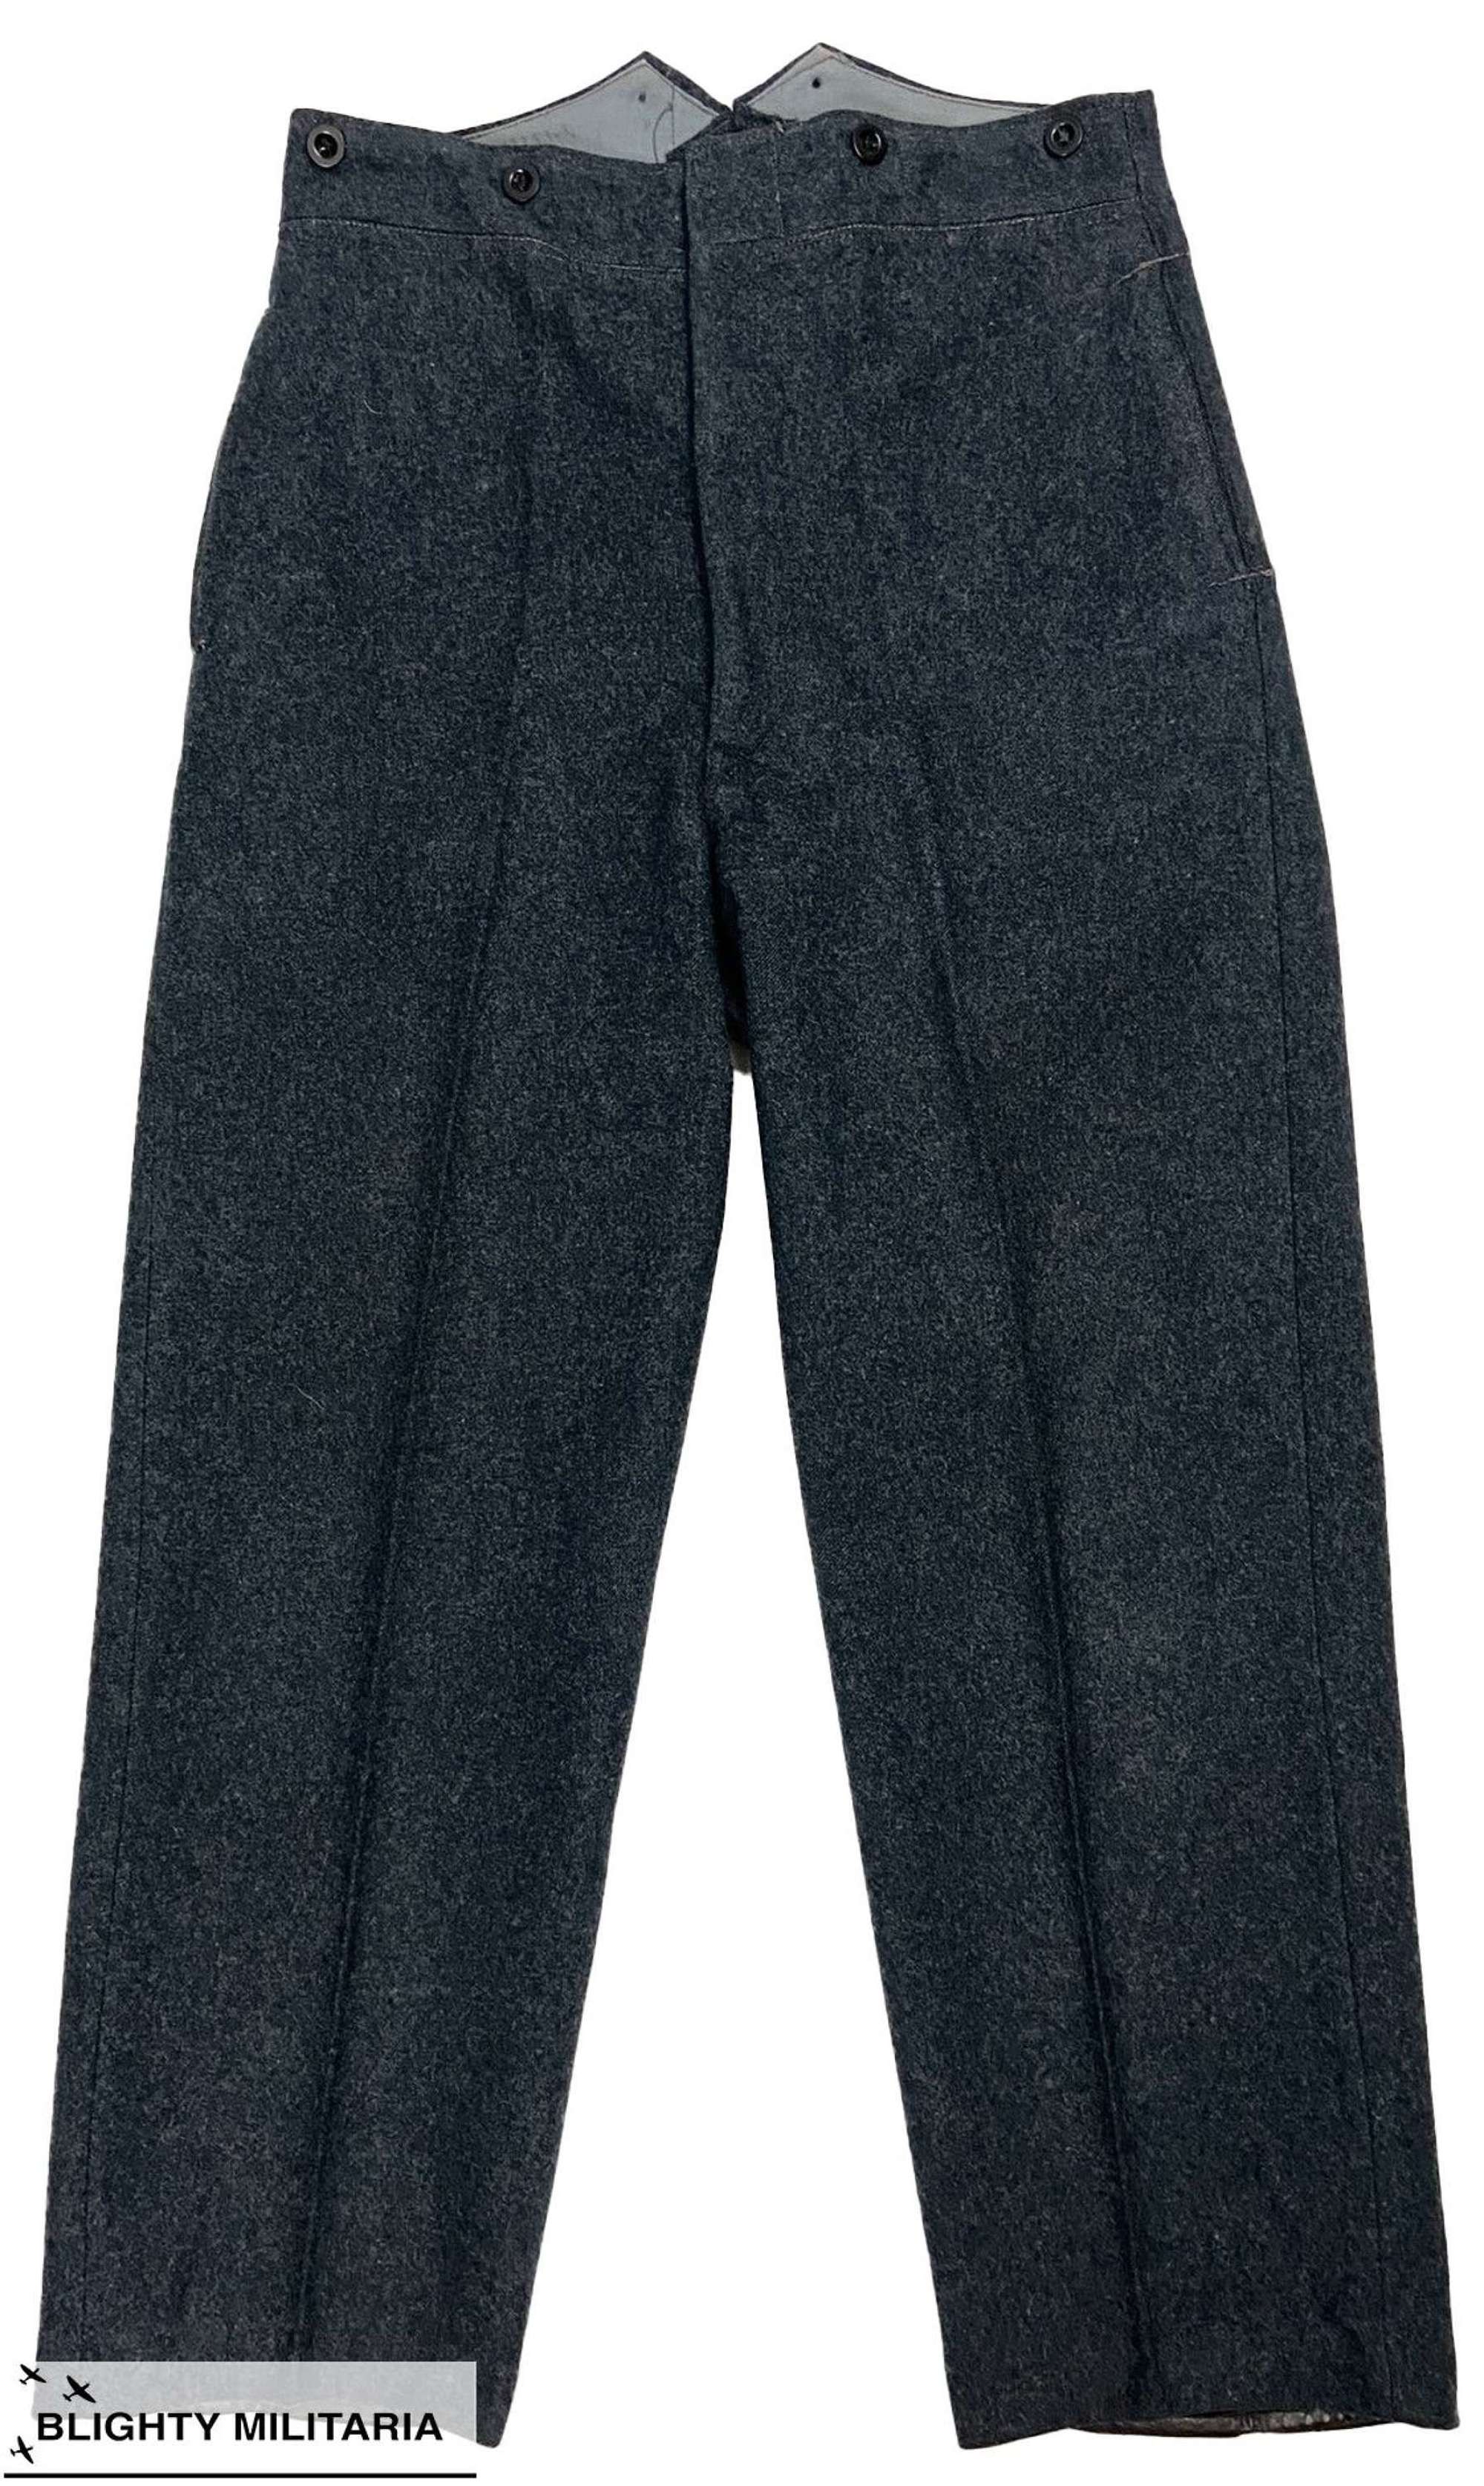 Original 1950 Dated RAF Ordinary Airman's Trousers - Size 17